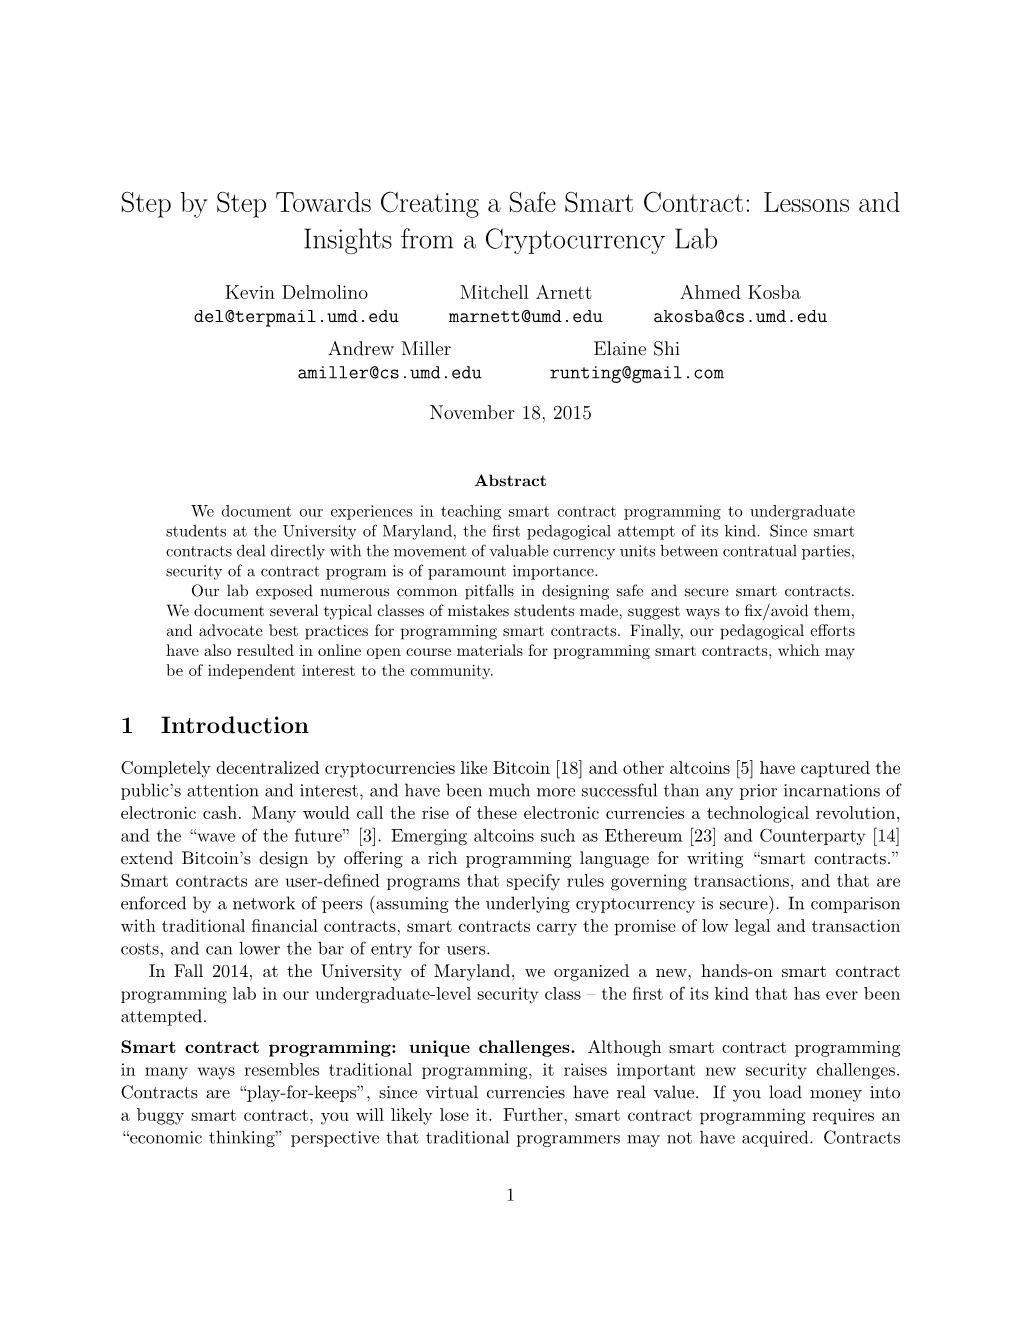 Step by Step Towards Creating a Safe Smart Contract: Lessons and Insights from a Cryptocurrency Lab